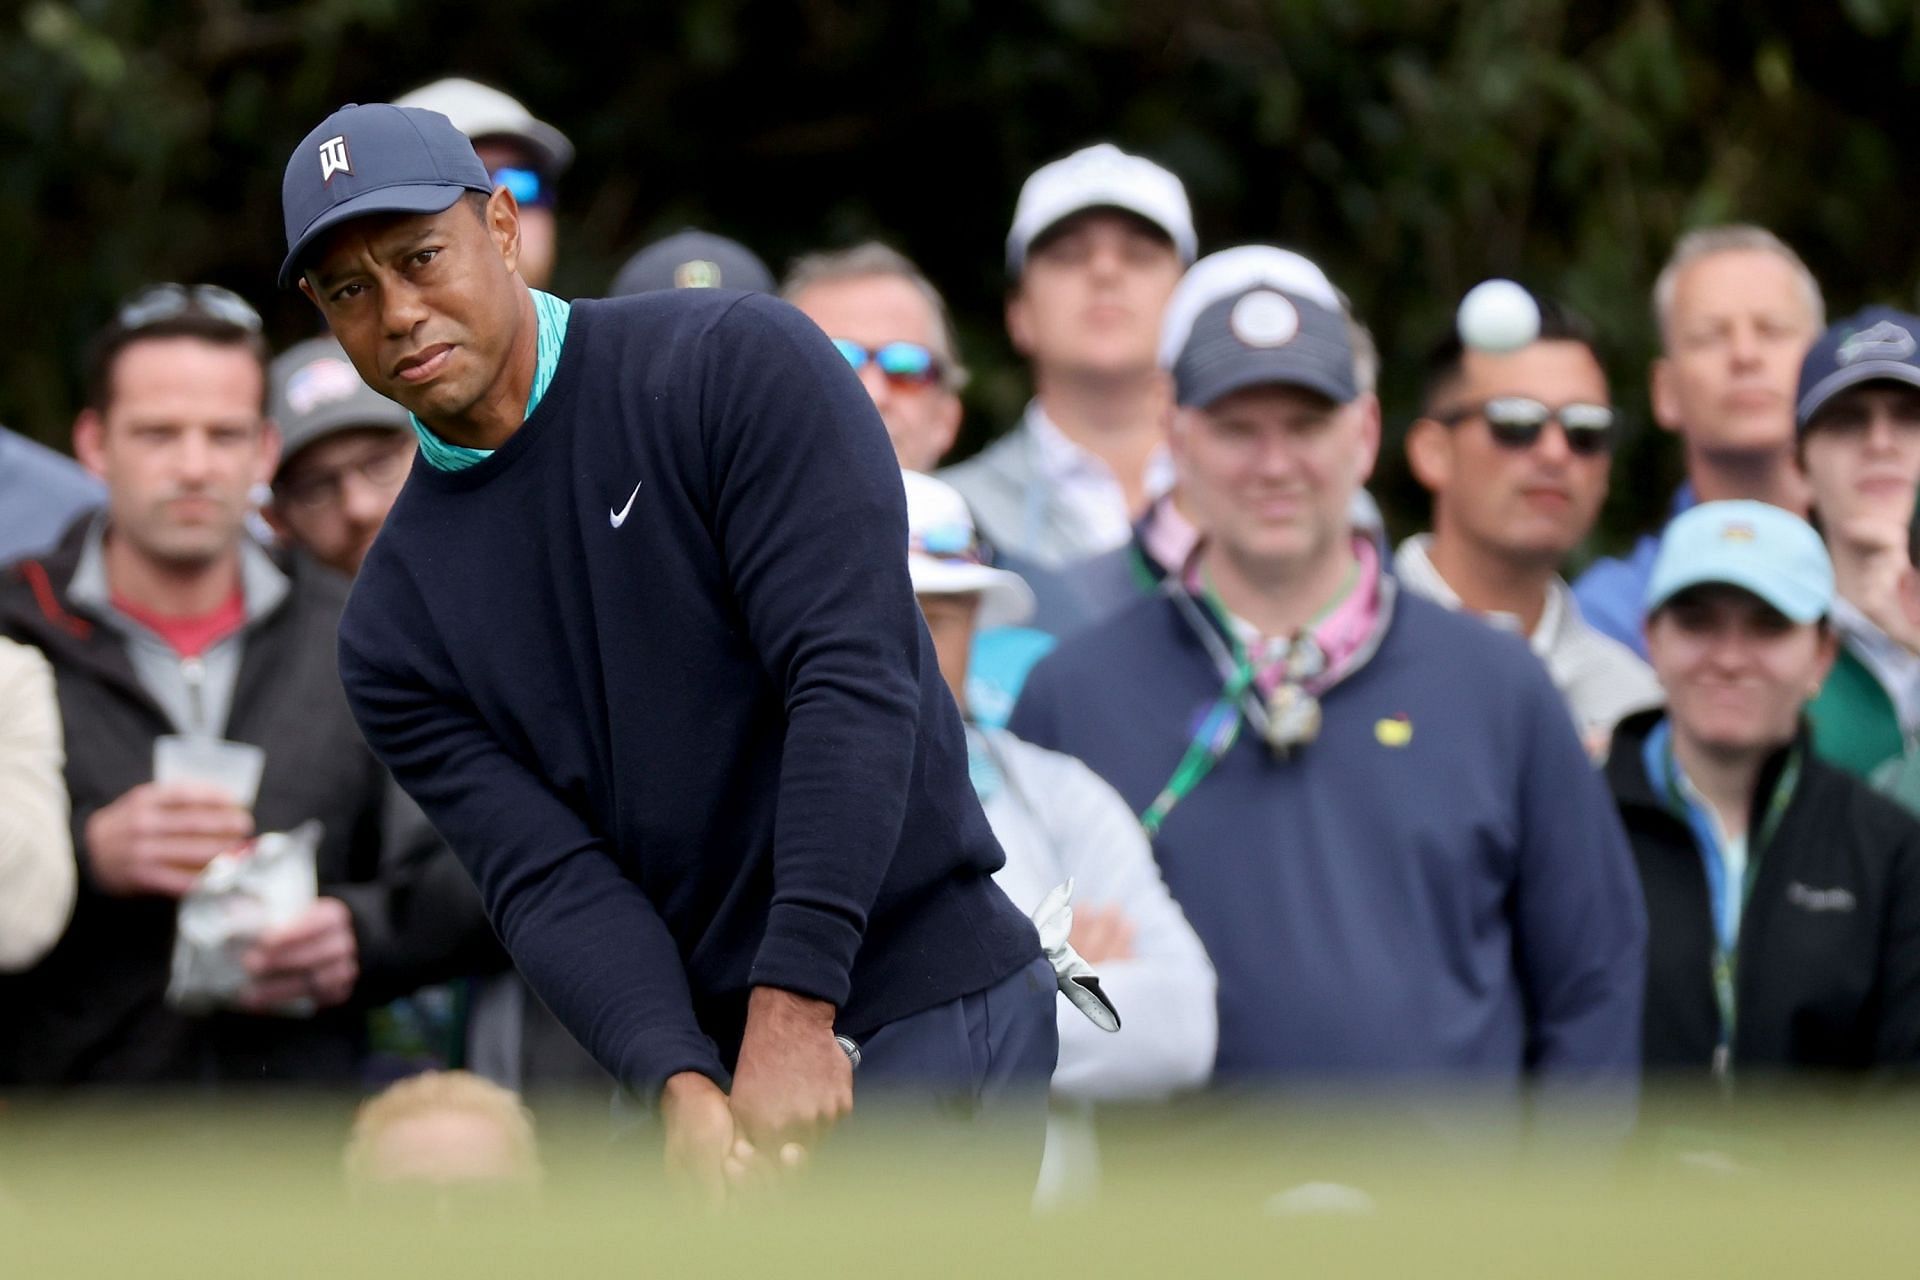 Tiger Woods announced a new golf course designed by him at Marcella Club, Utah